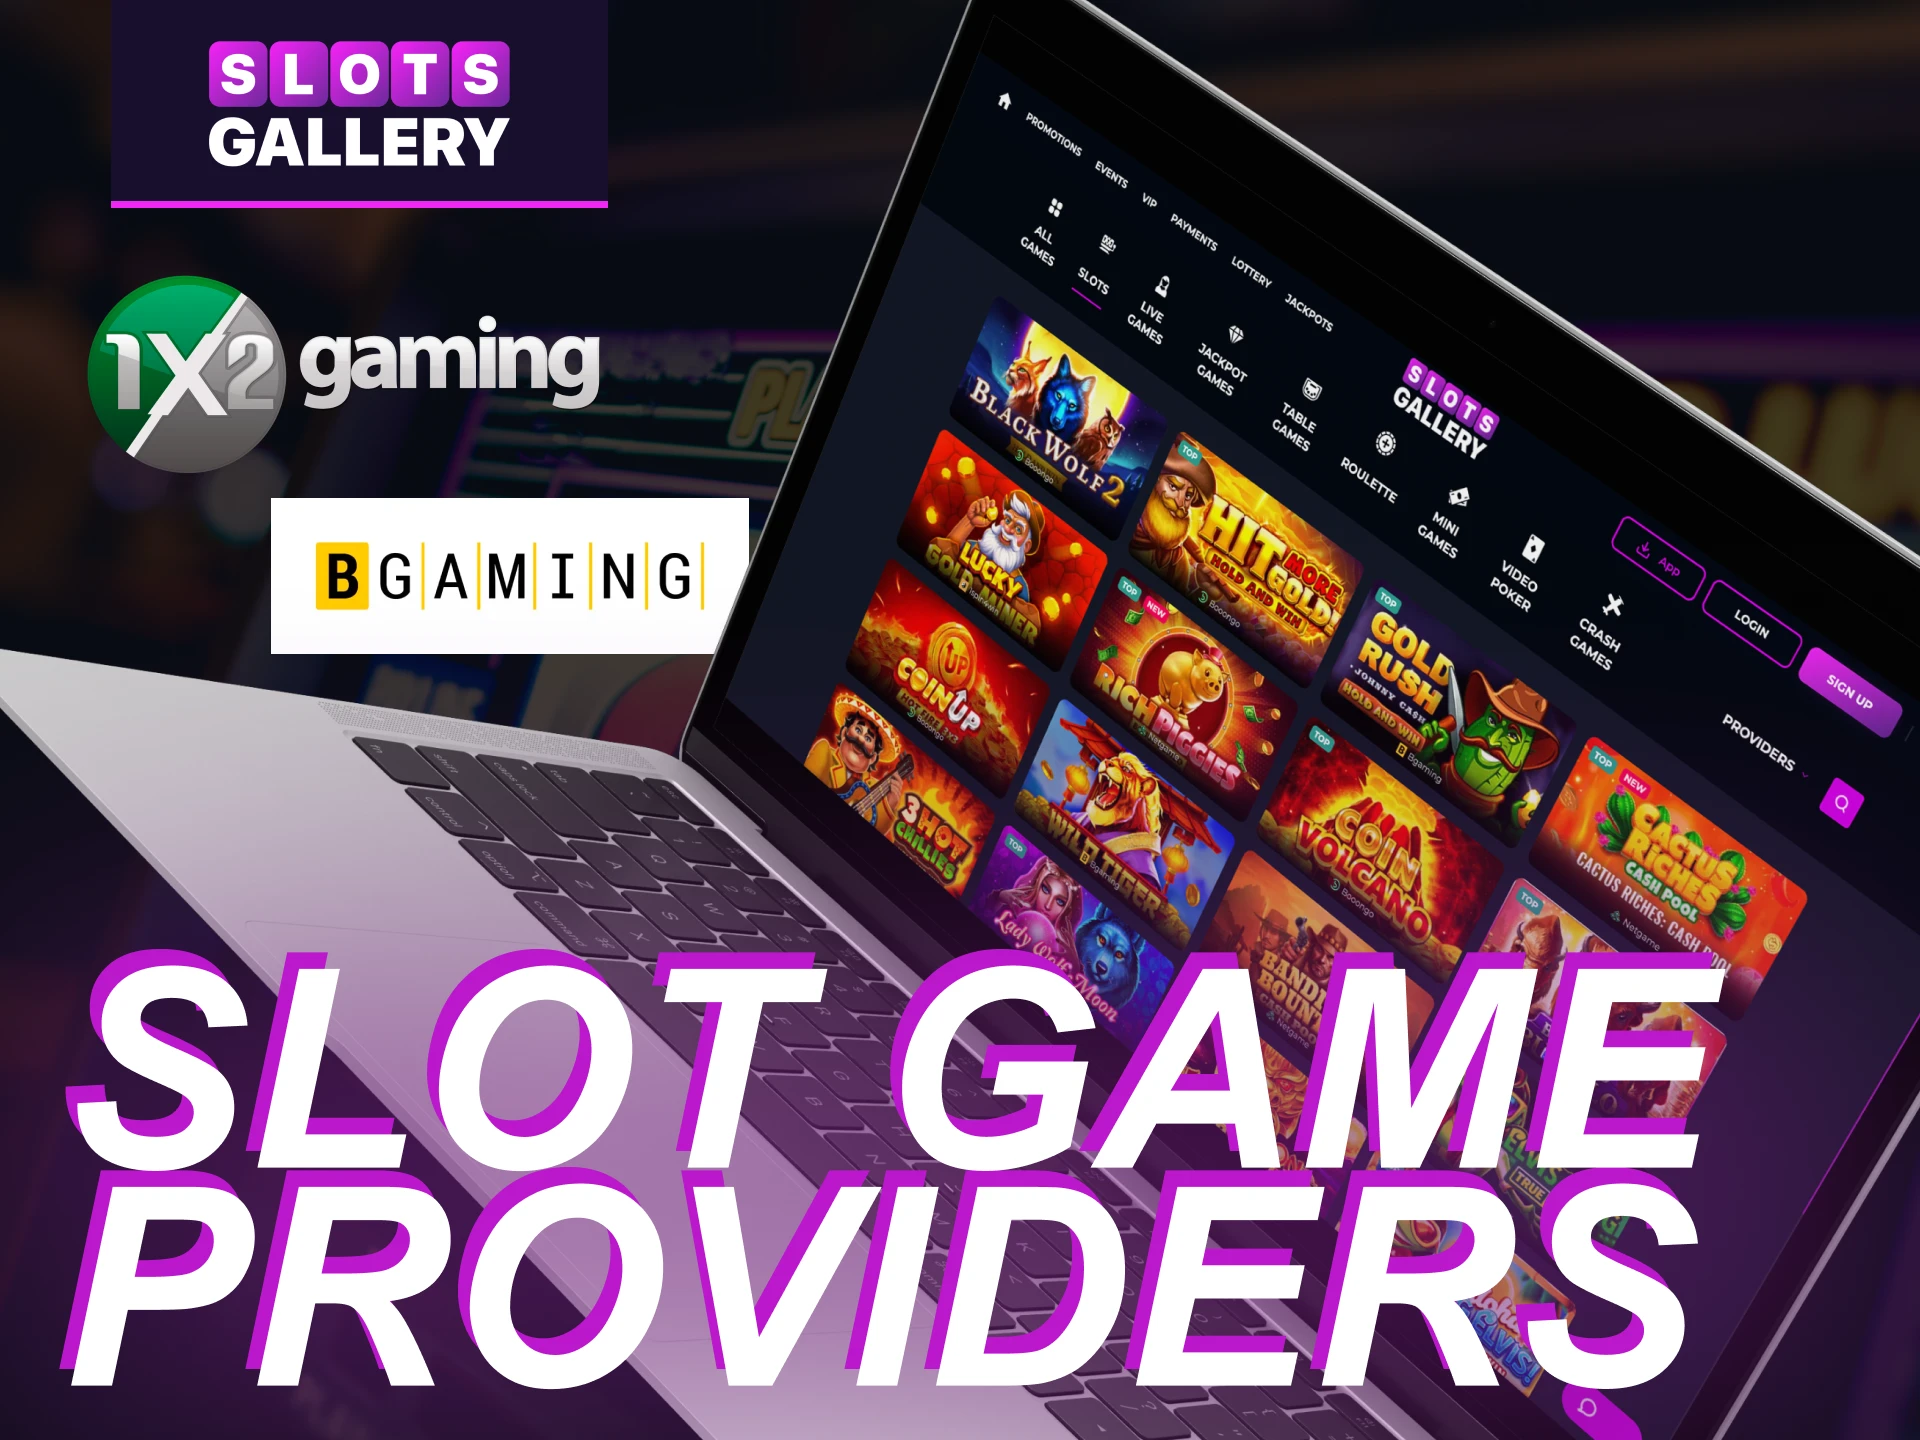 Slot games from which developers are available in the online casino Slots Gallery.